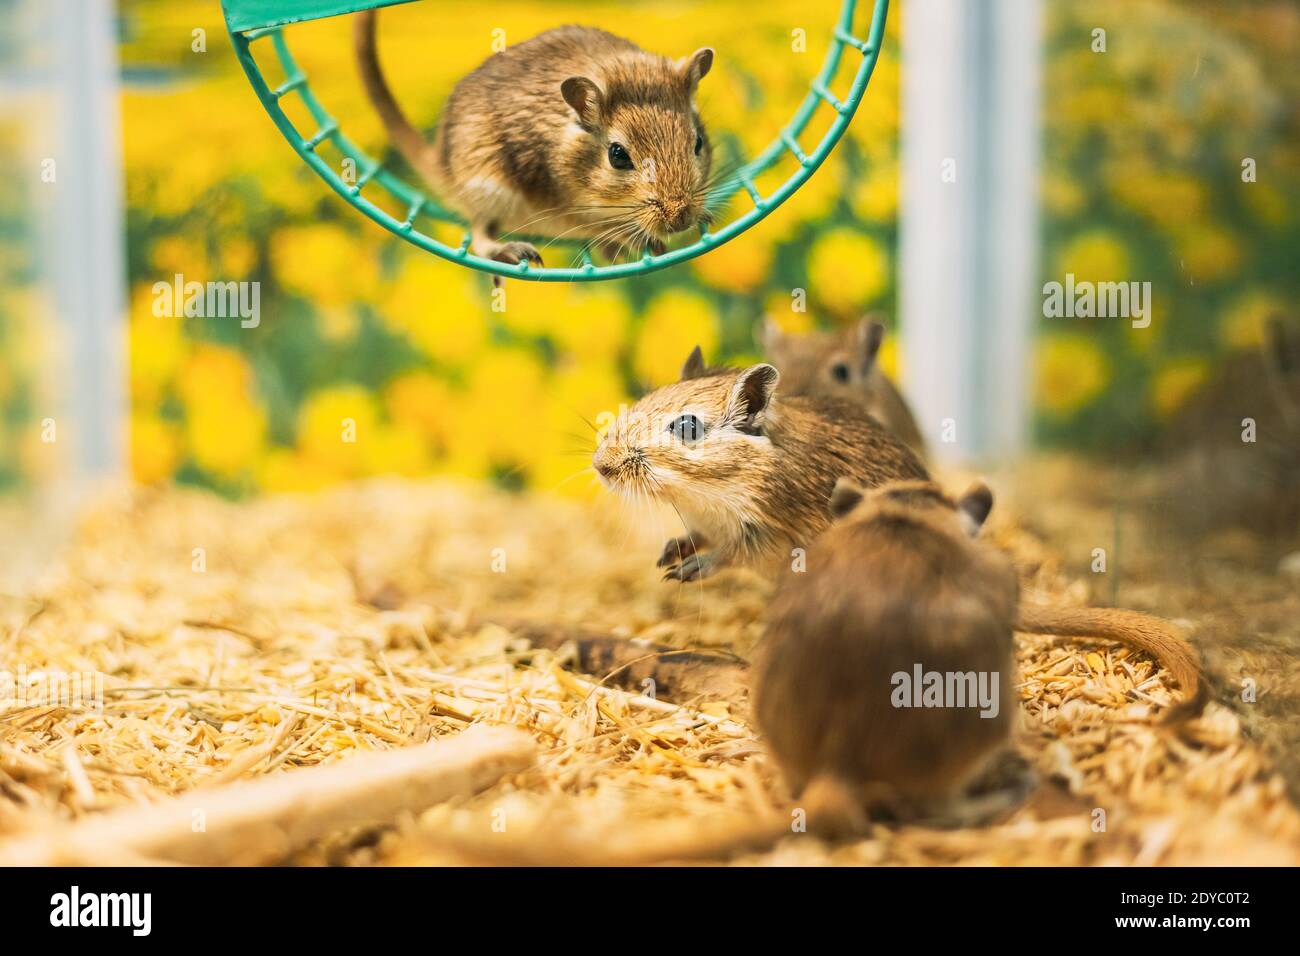 Meriones Unguiculatus, The Mongolian Jird Or Mongolian Gerbil Is A Rodent Belonging To Subfamily Gerbillinae. Stock Photo